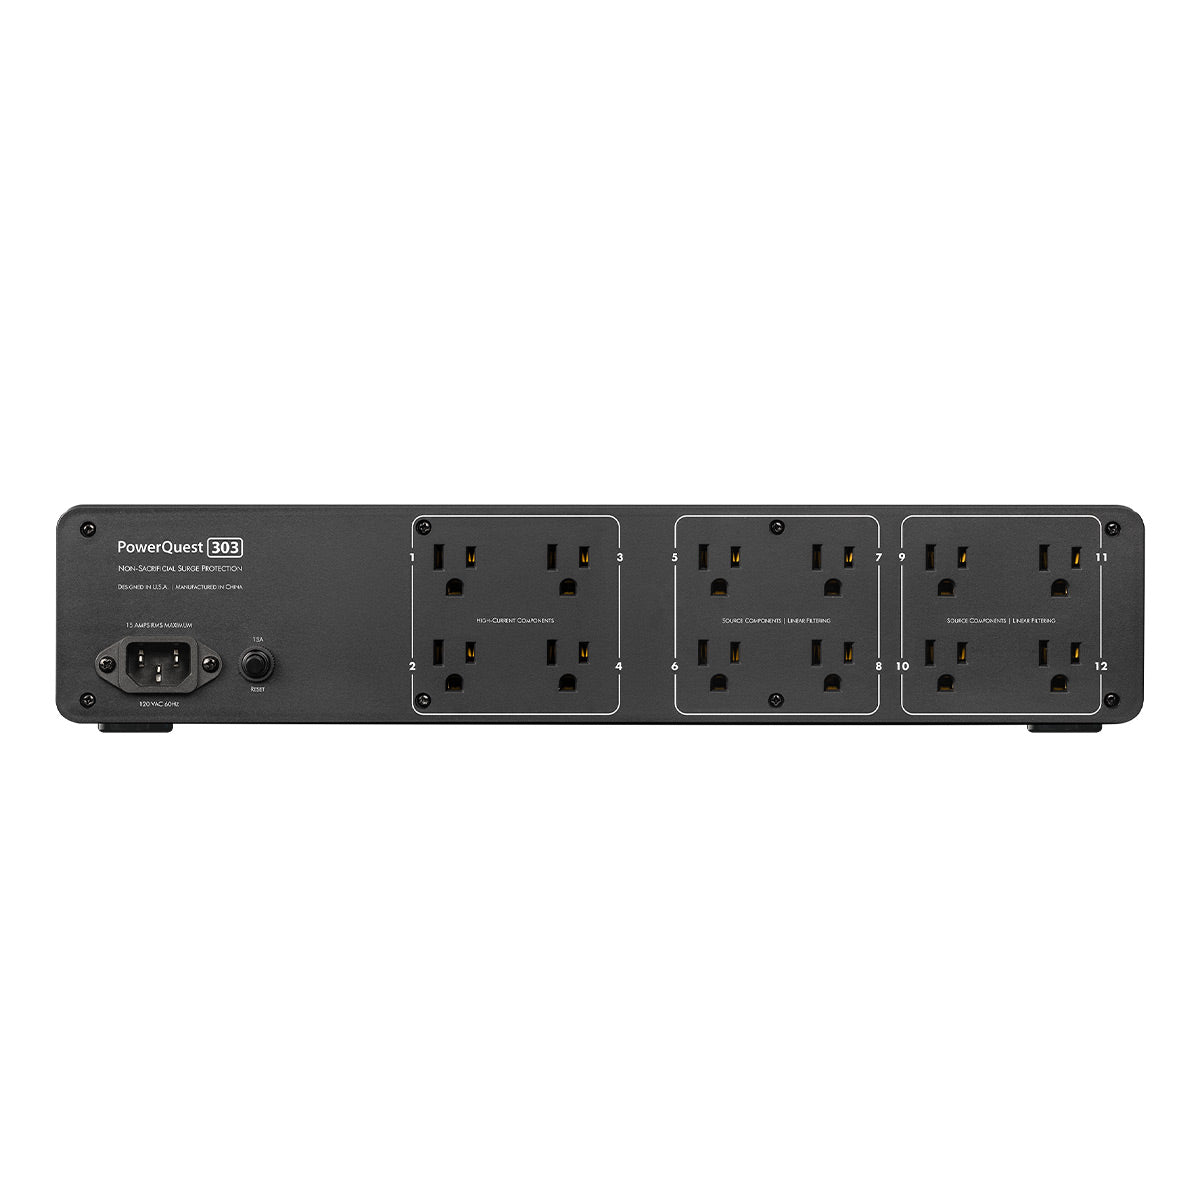 AudioQuest PowerQuest 303 Surge Protector and Power Conditioner with 12 Outlets